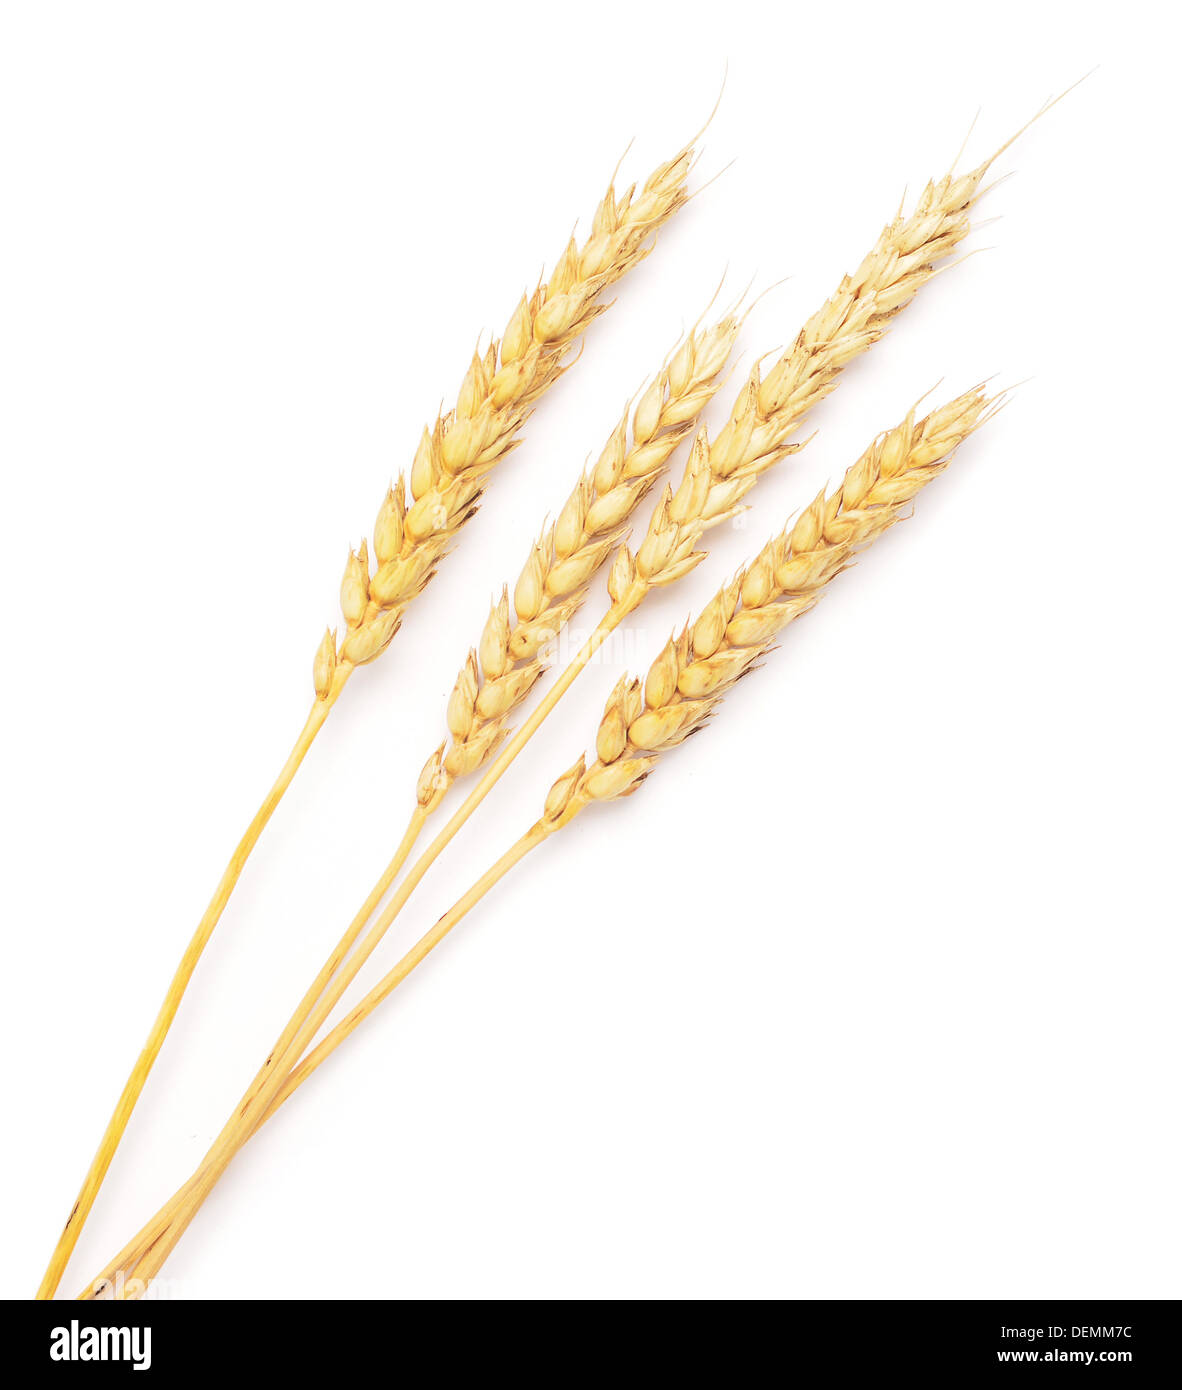 wheat ears isolated on white background Stock Photo